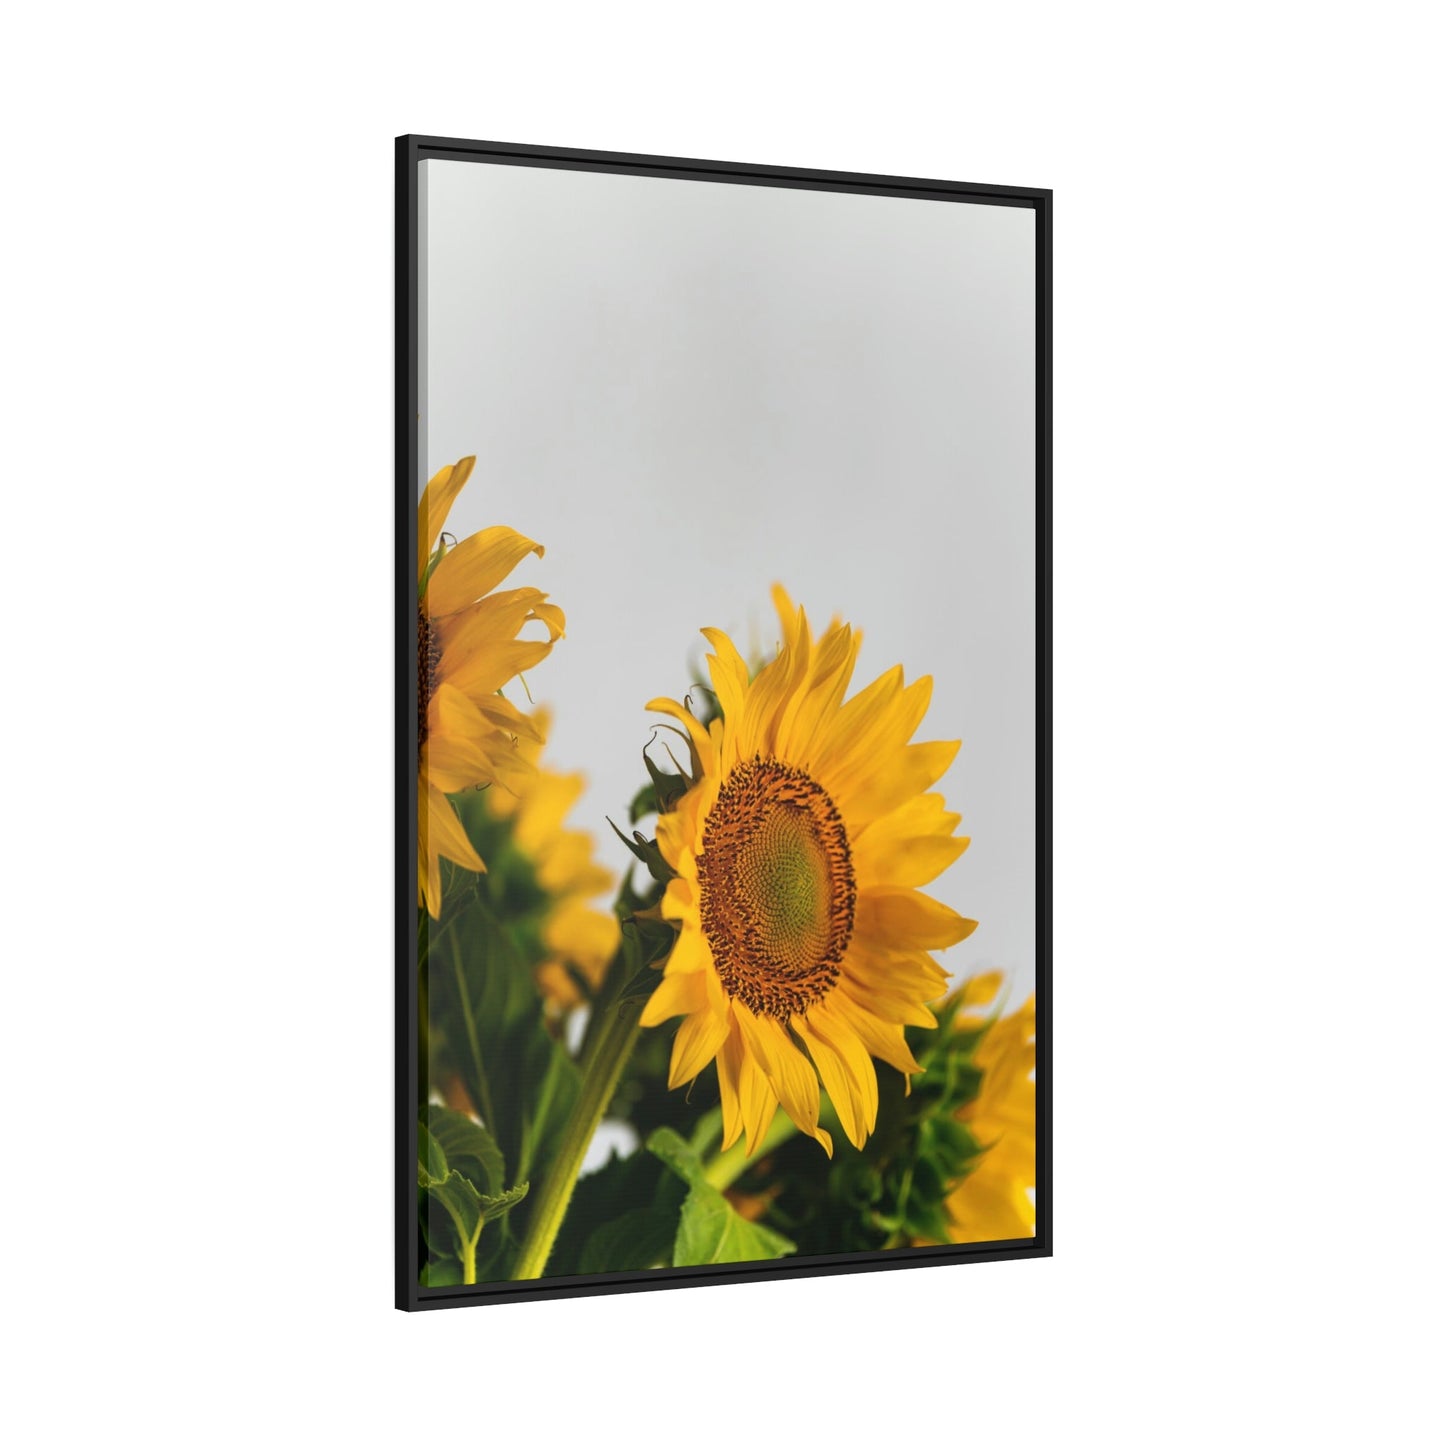 Sunny Delight: A Blissful and Cheerful Glimpse into the Beauty of Sunflowers